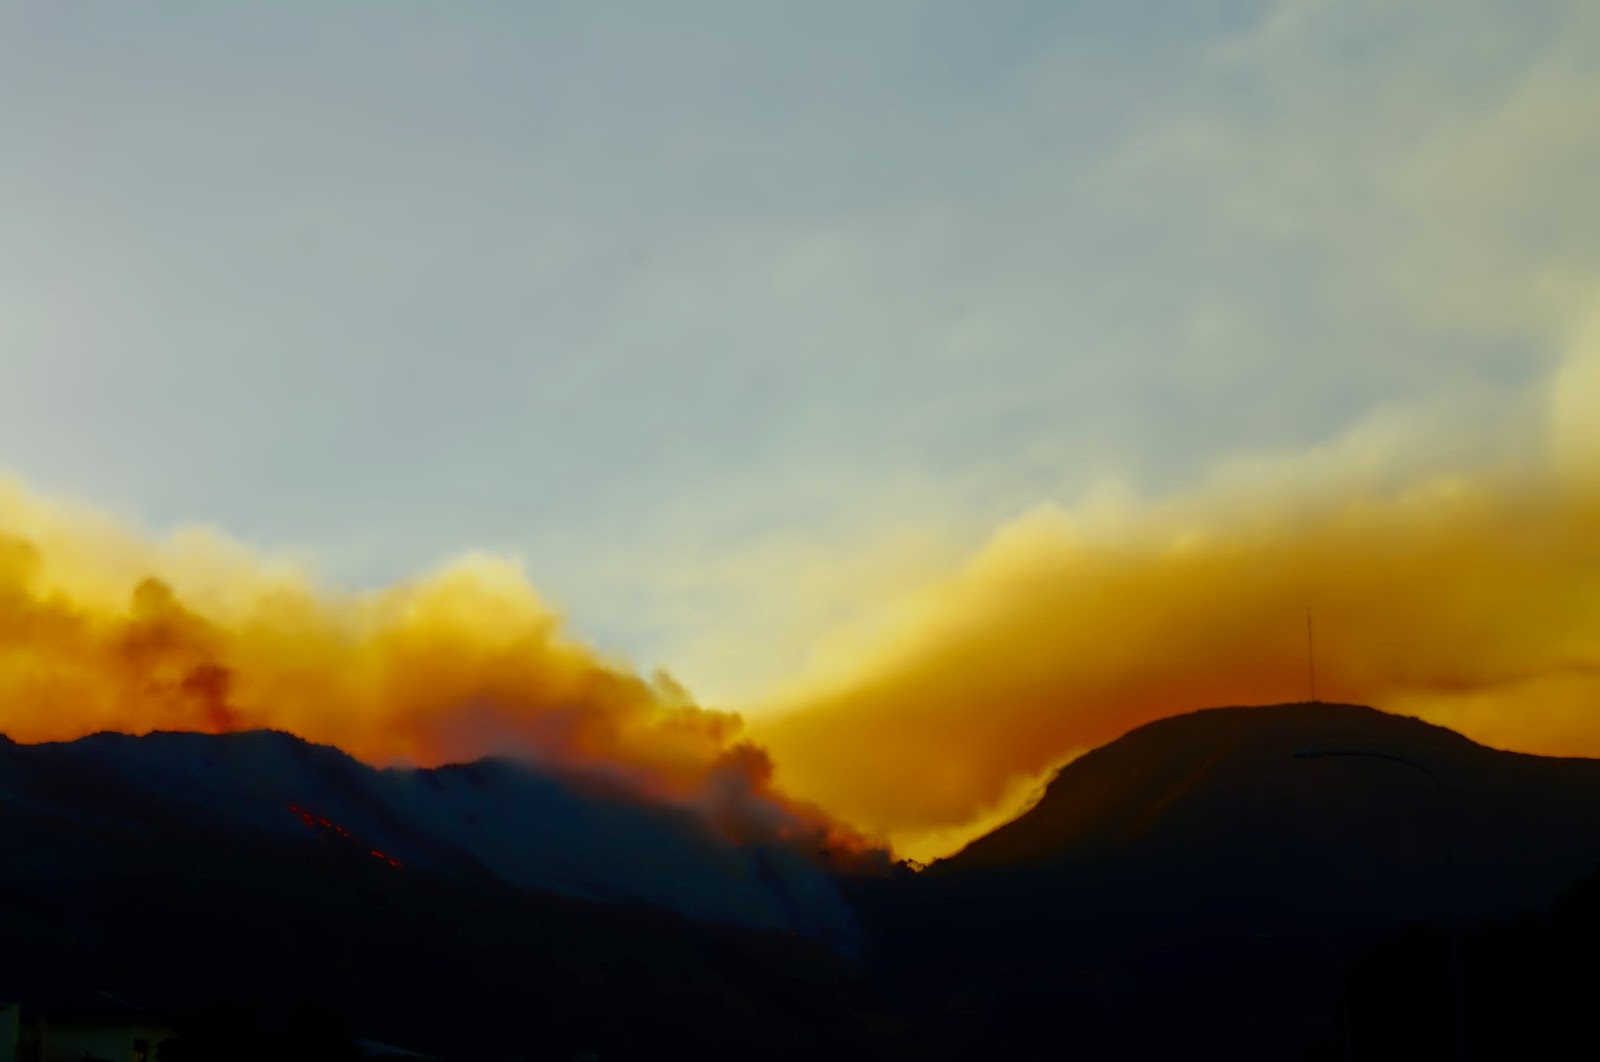 Fire and smoke on mountains